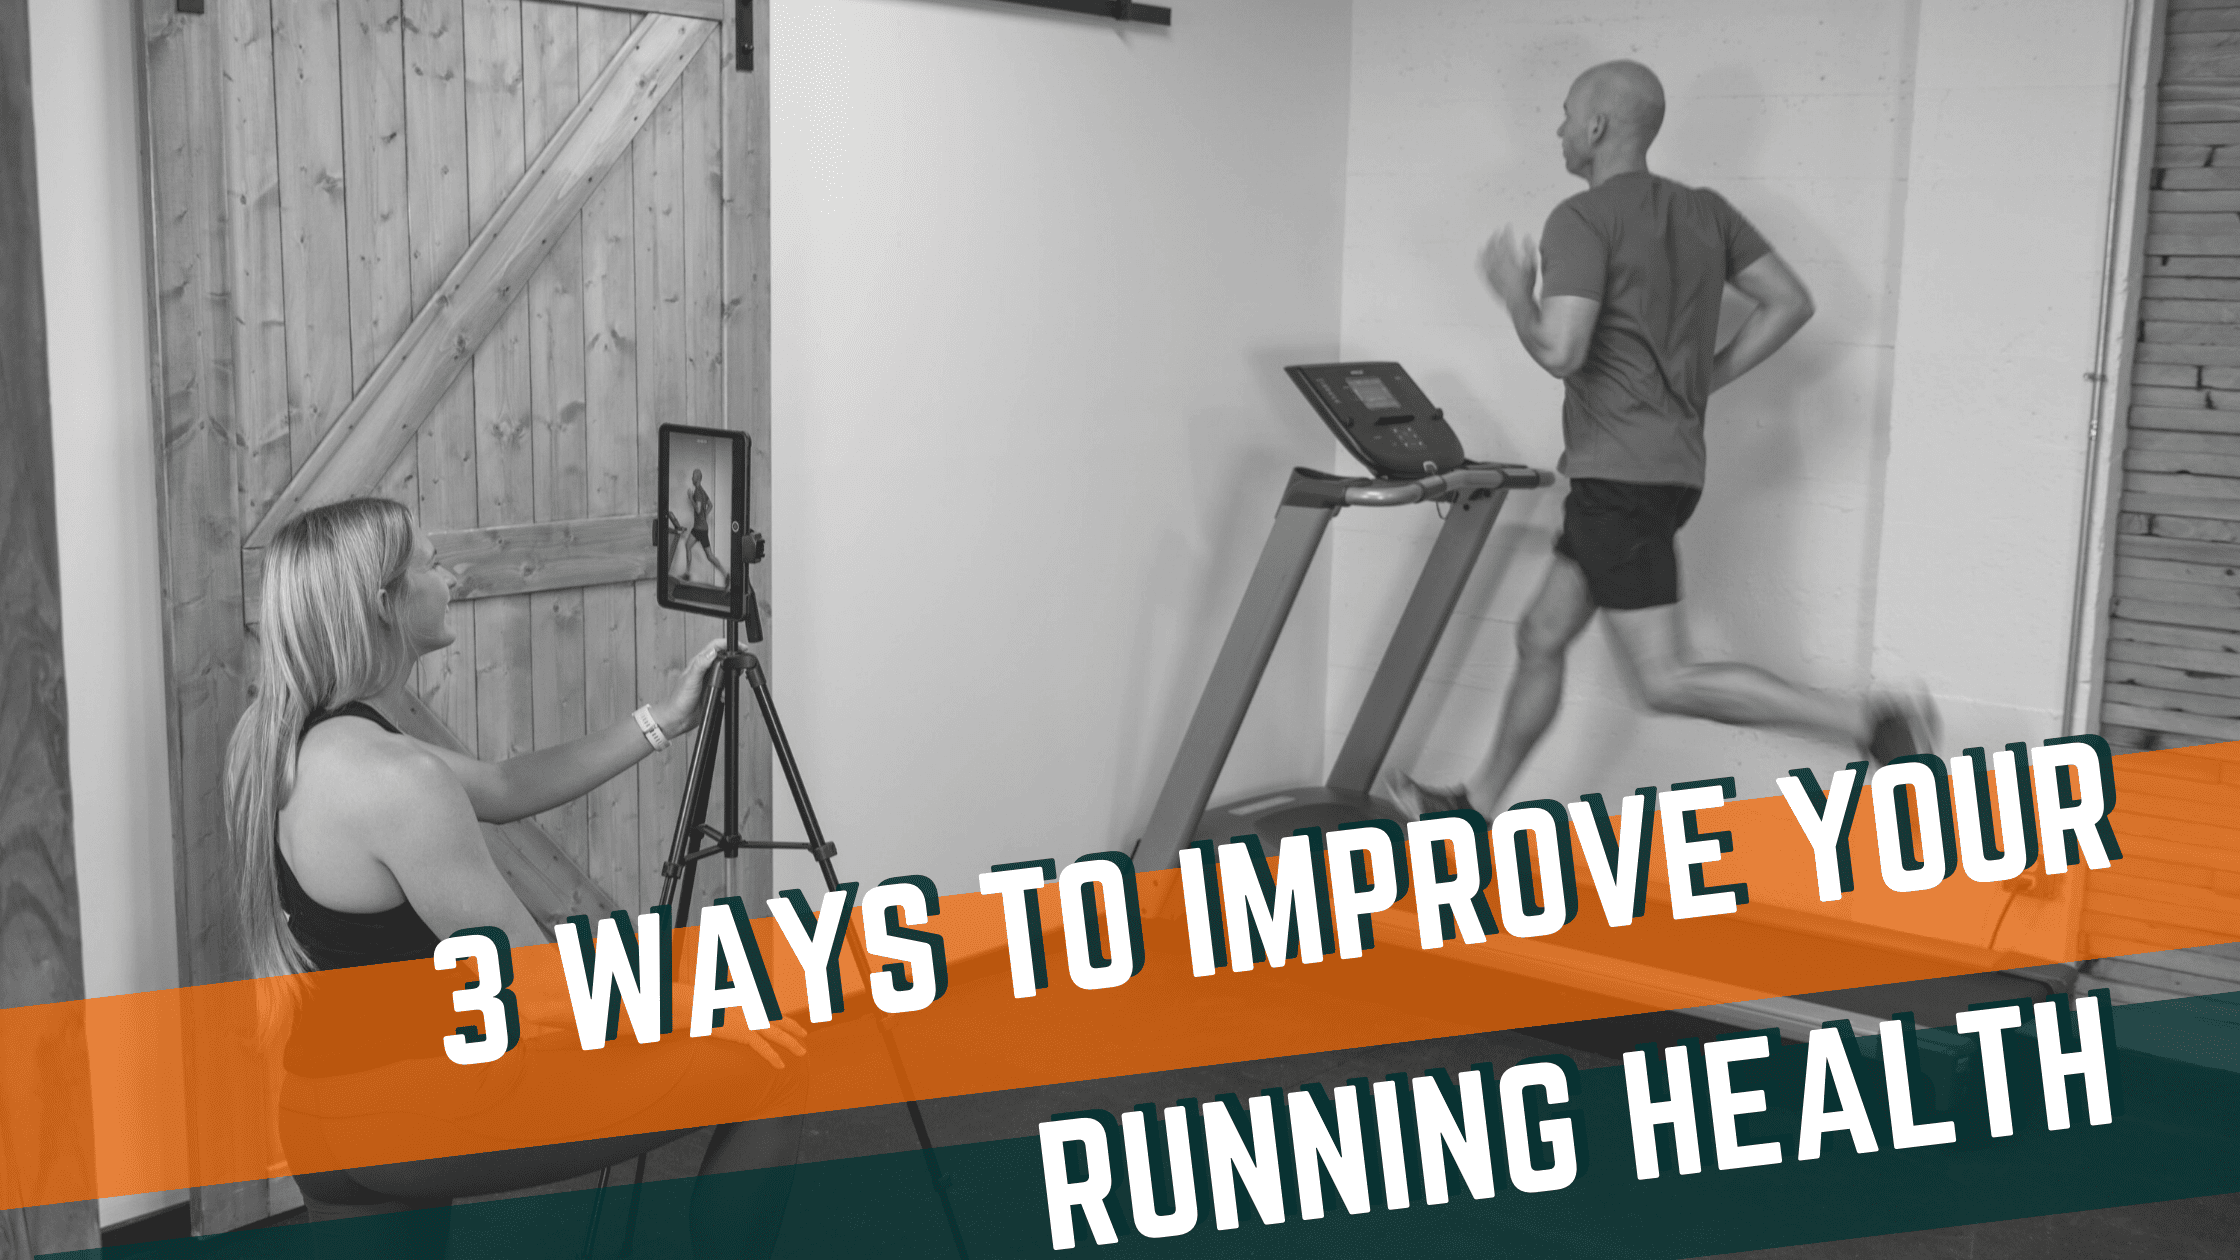 Featured image for “3 Ways to Improve Your Running Health”